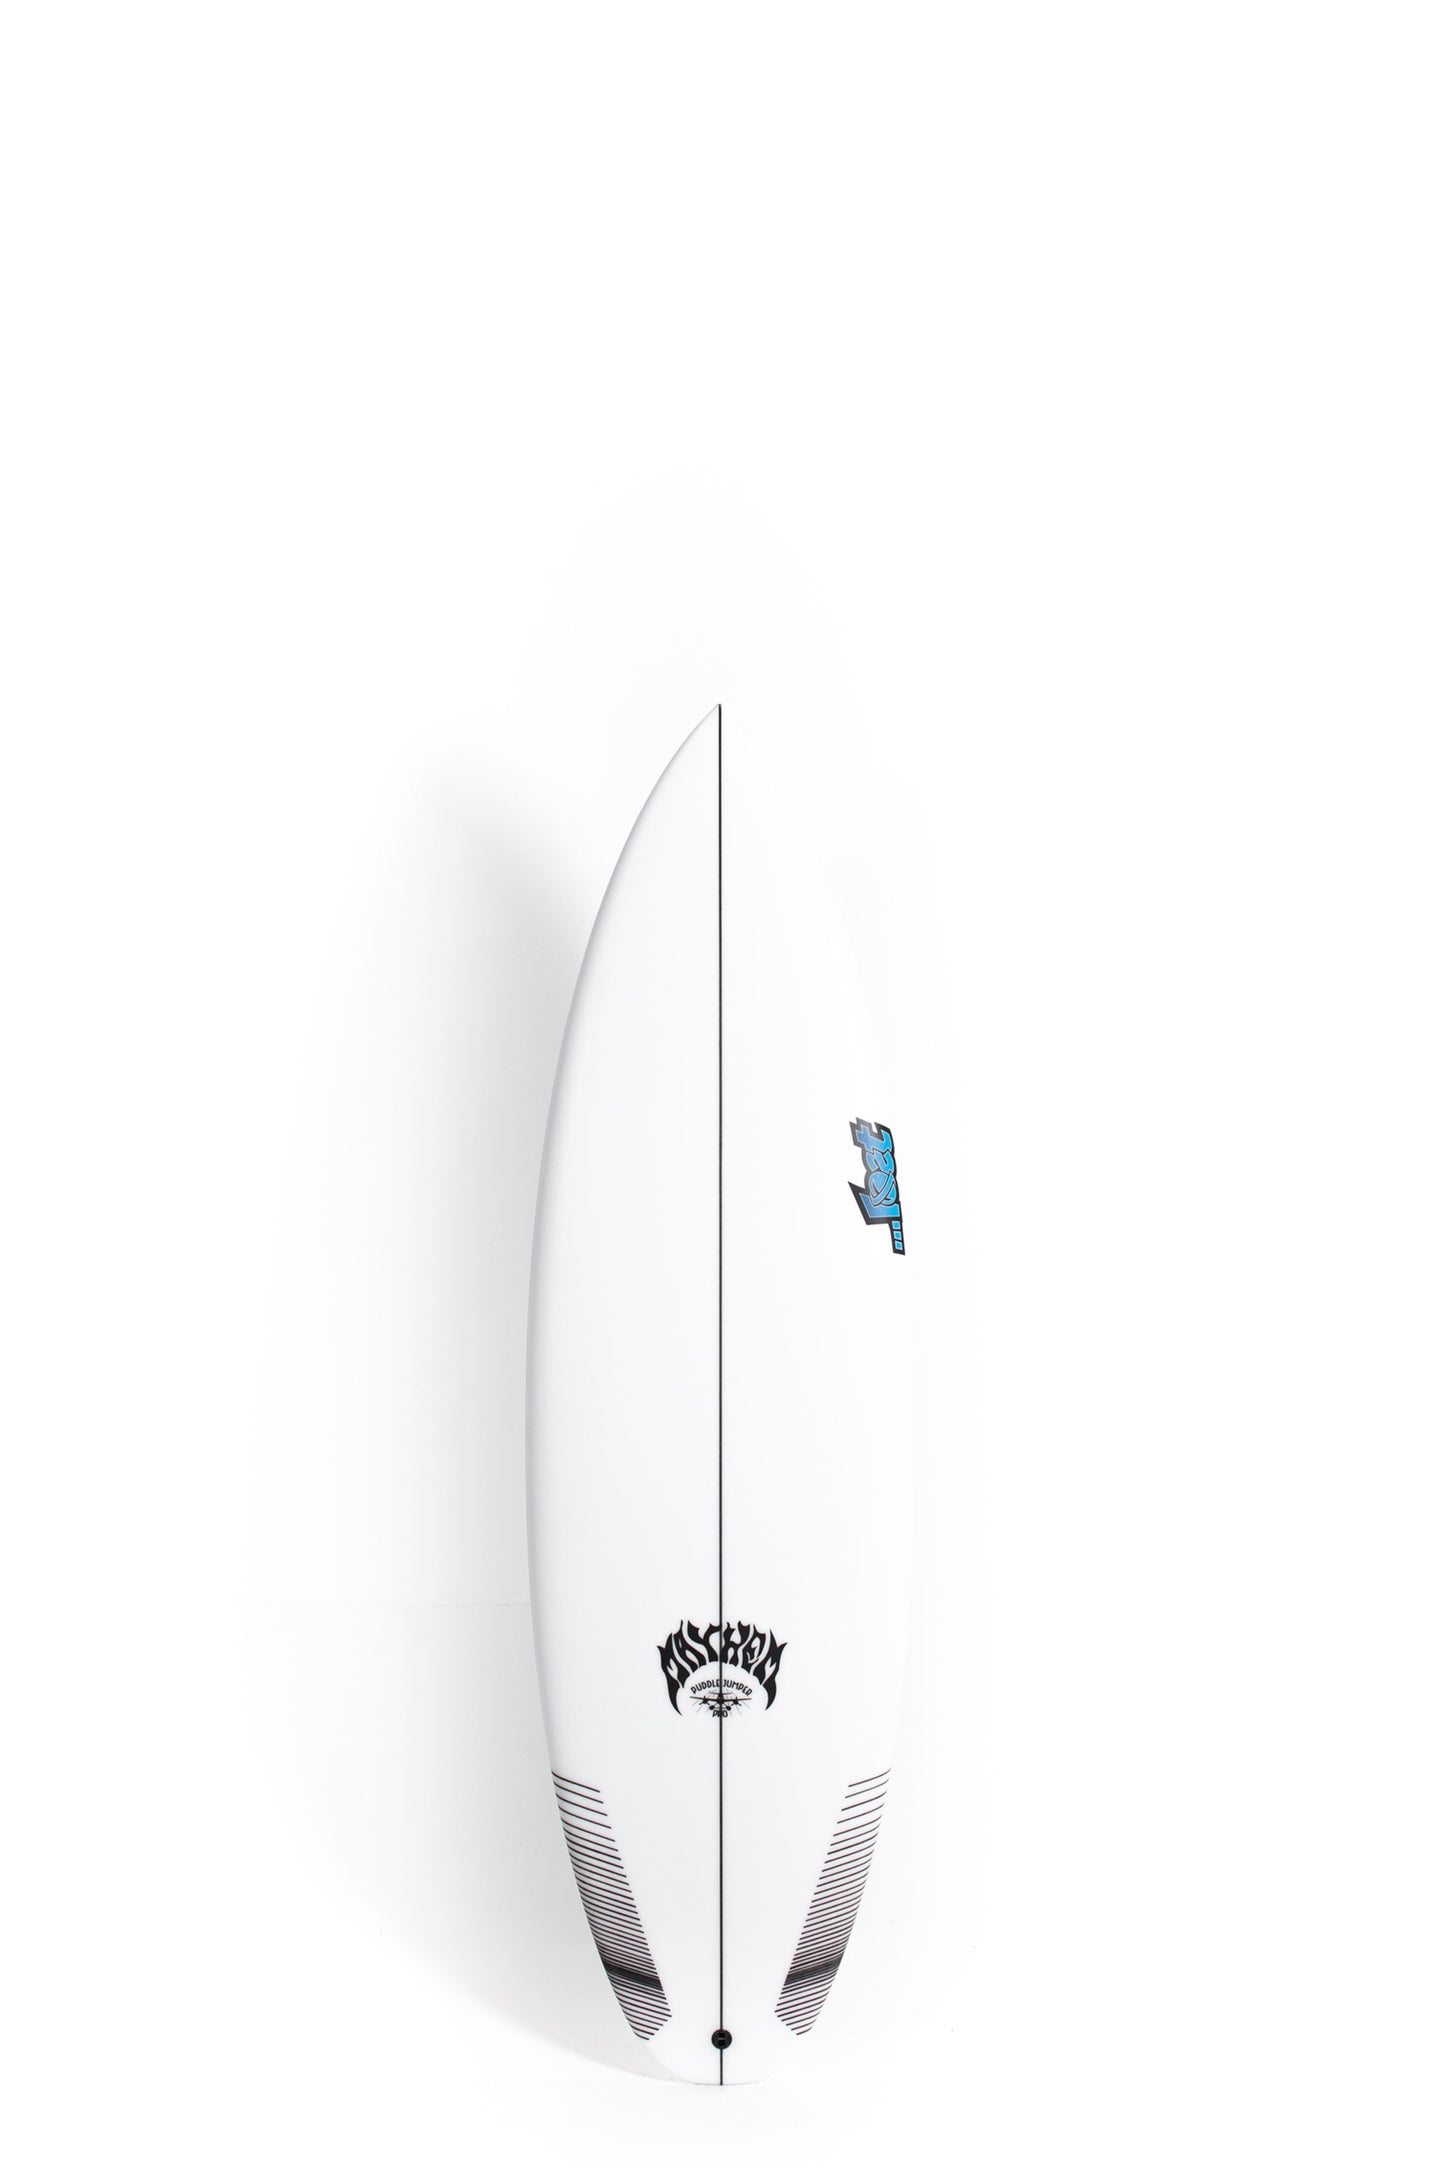 LOST SURFBOARDS | Available online at PUKAS SURF SHOP – Page 2